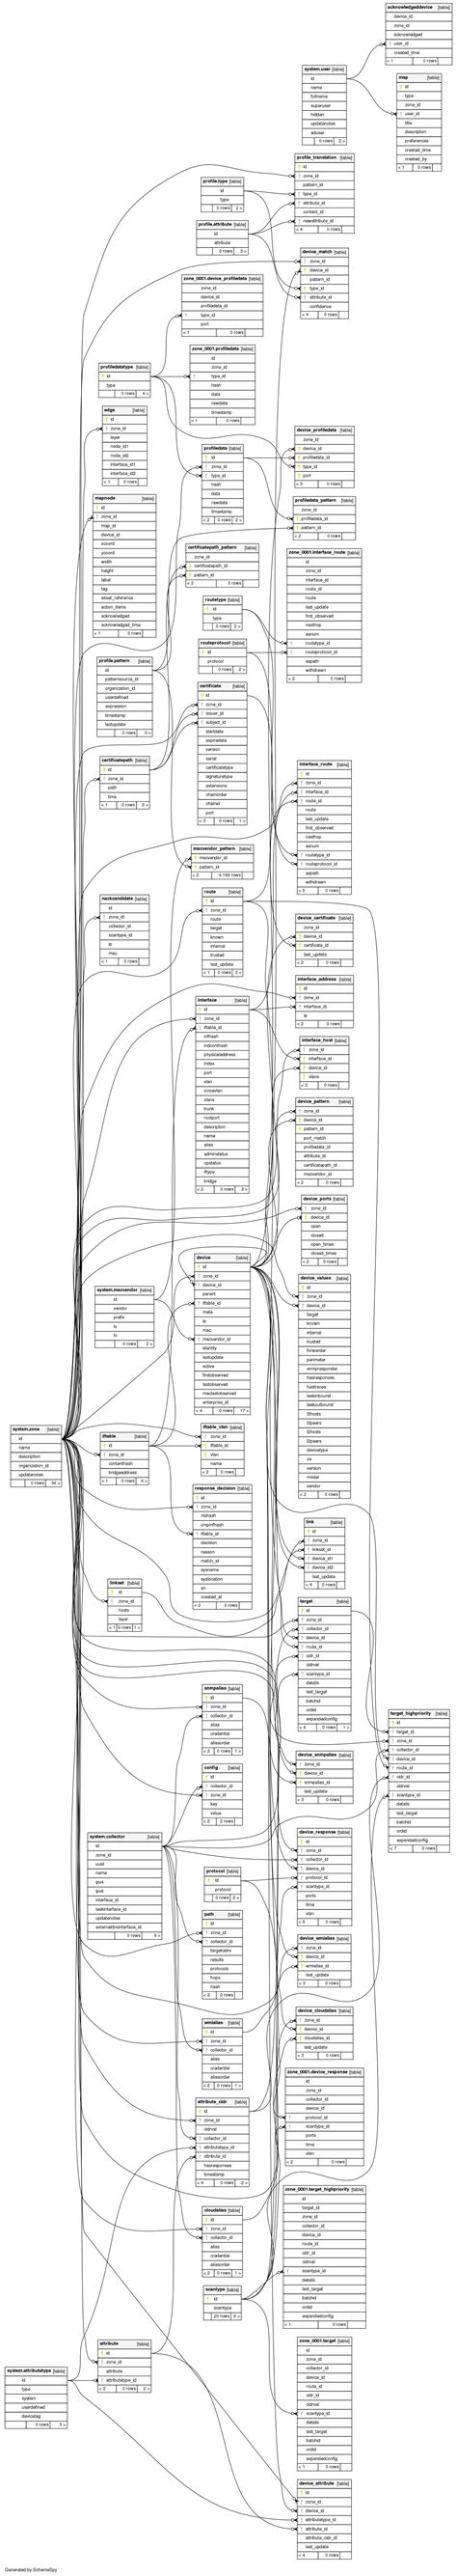 Database Help With Entity Relationship Diagram For Daniweb My Xxx Hot